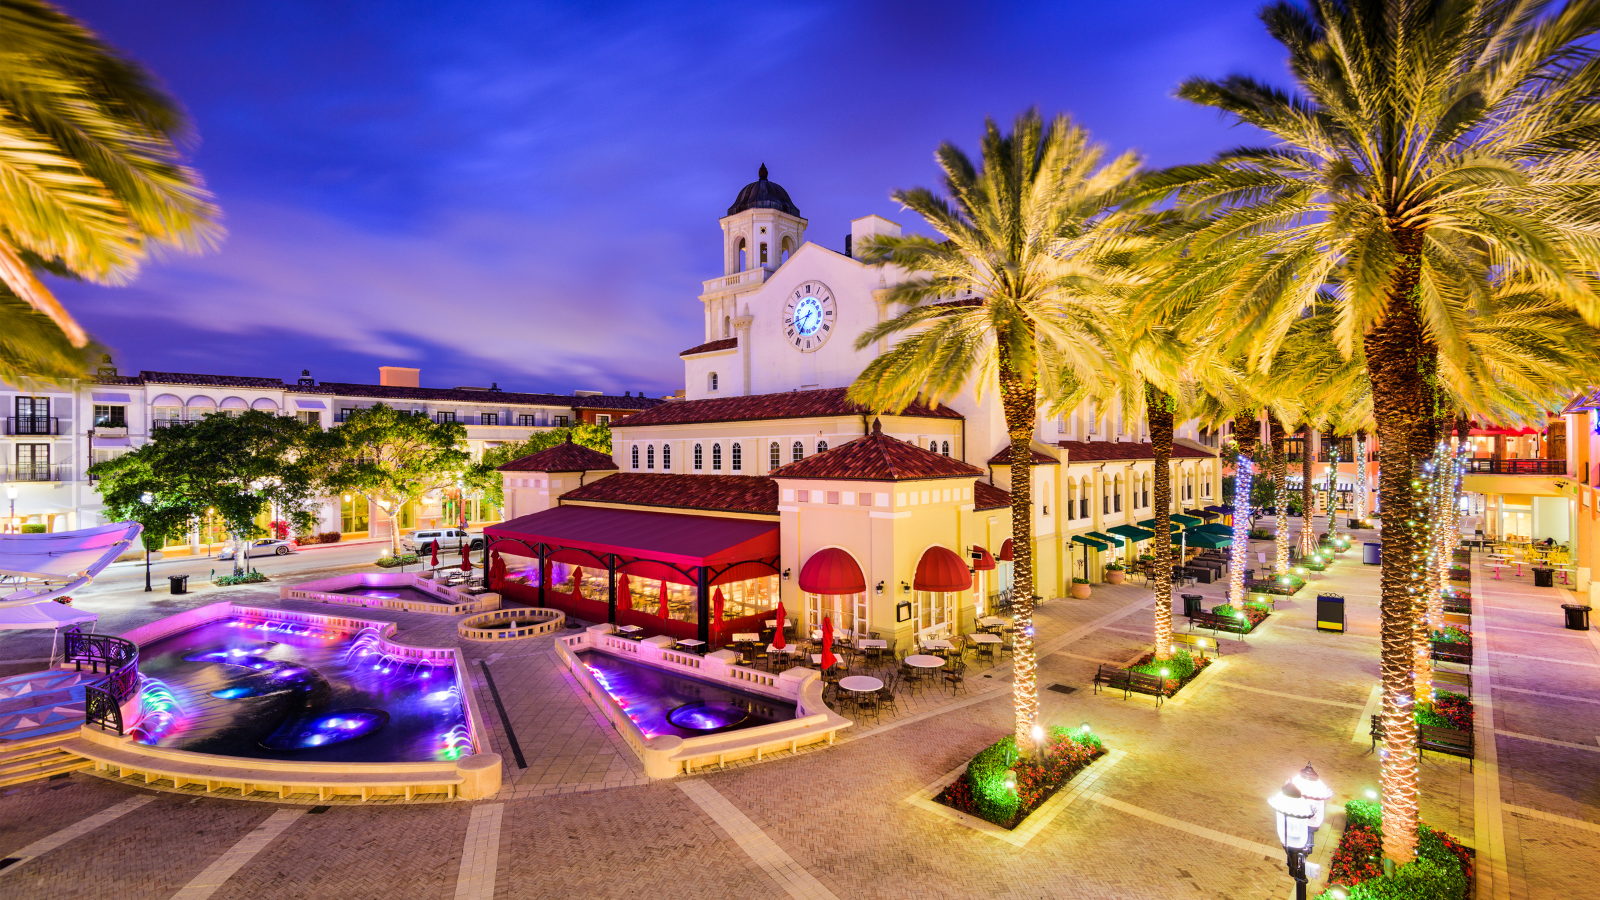 10 Best Spots for Nightlife in West Palm Beach